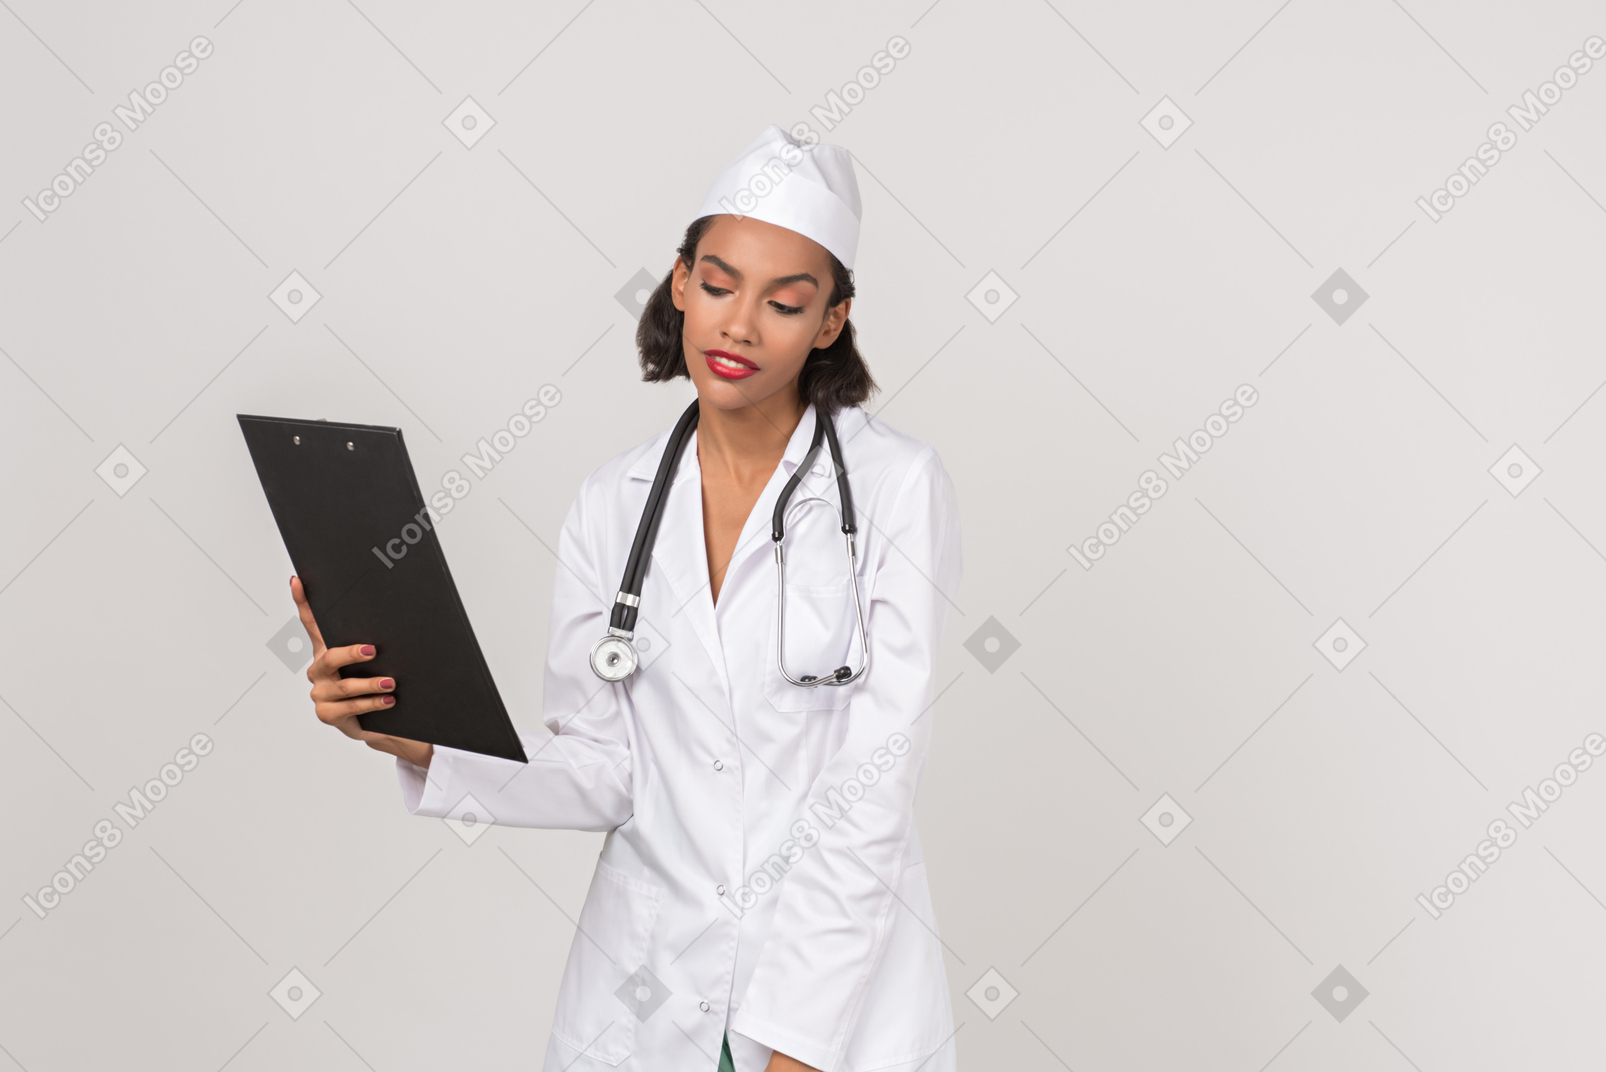 Attractive female doctor looking through some documents